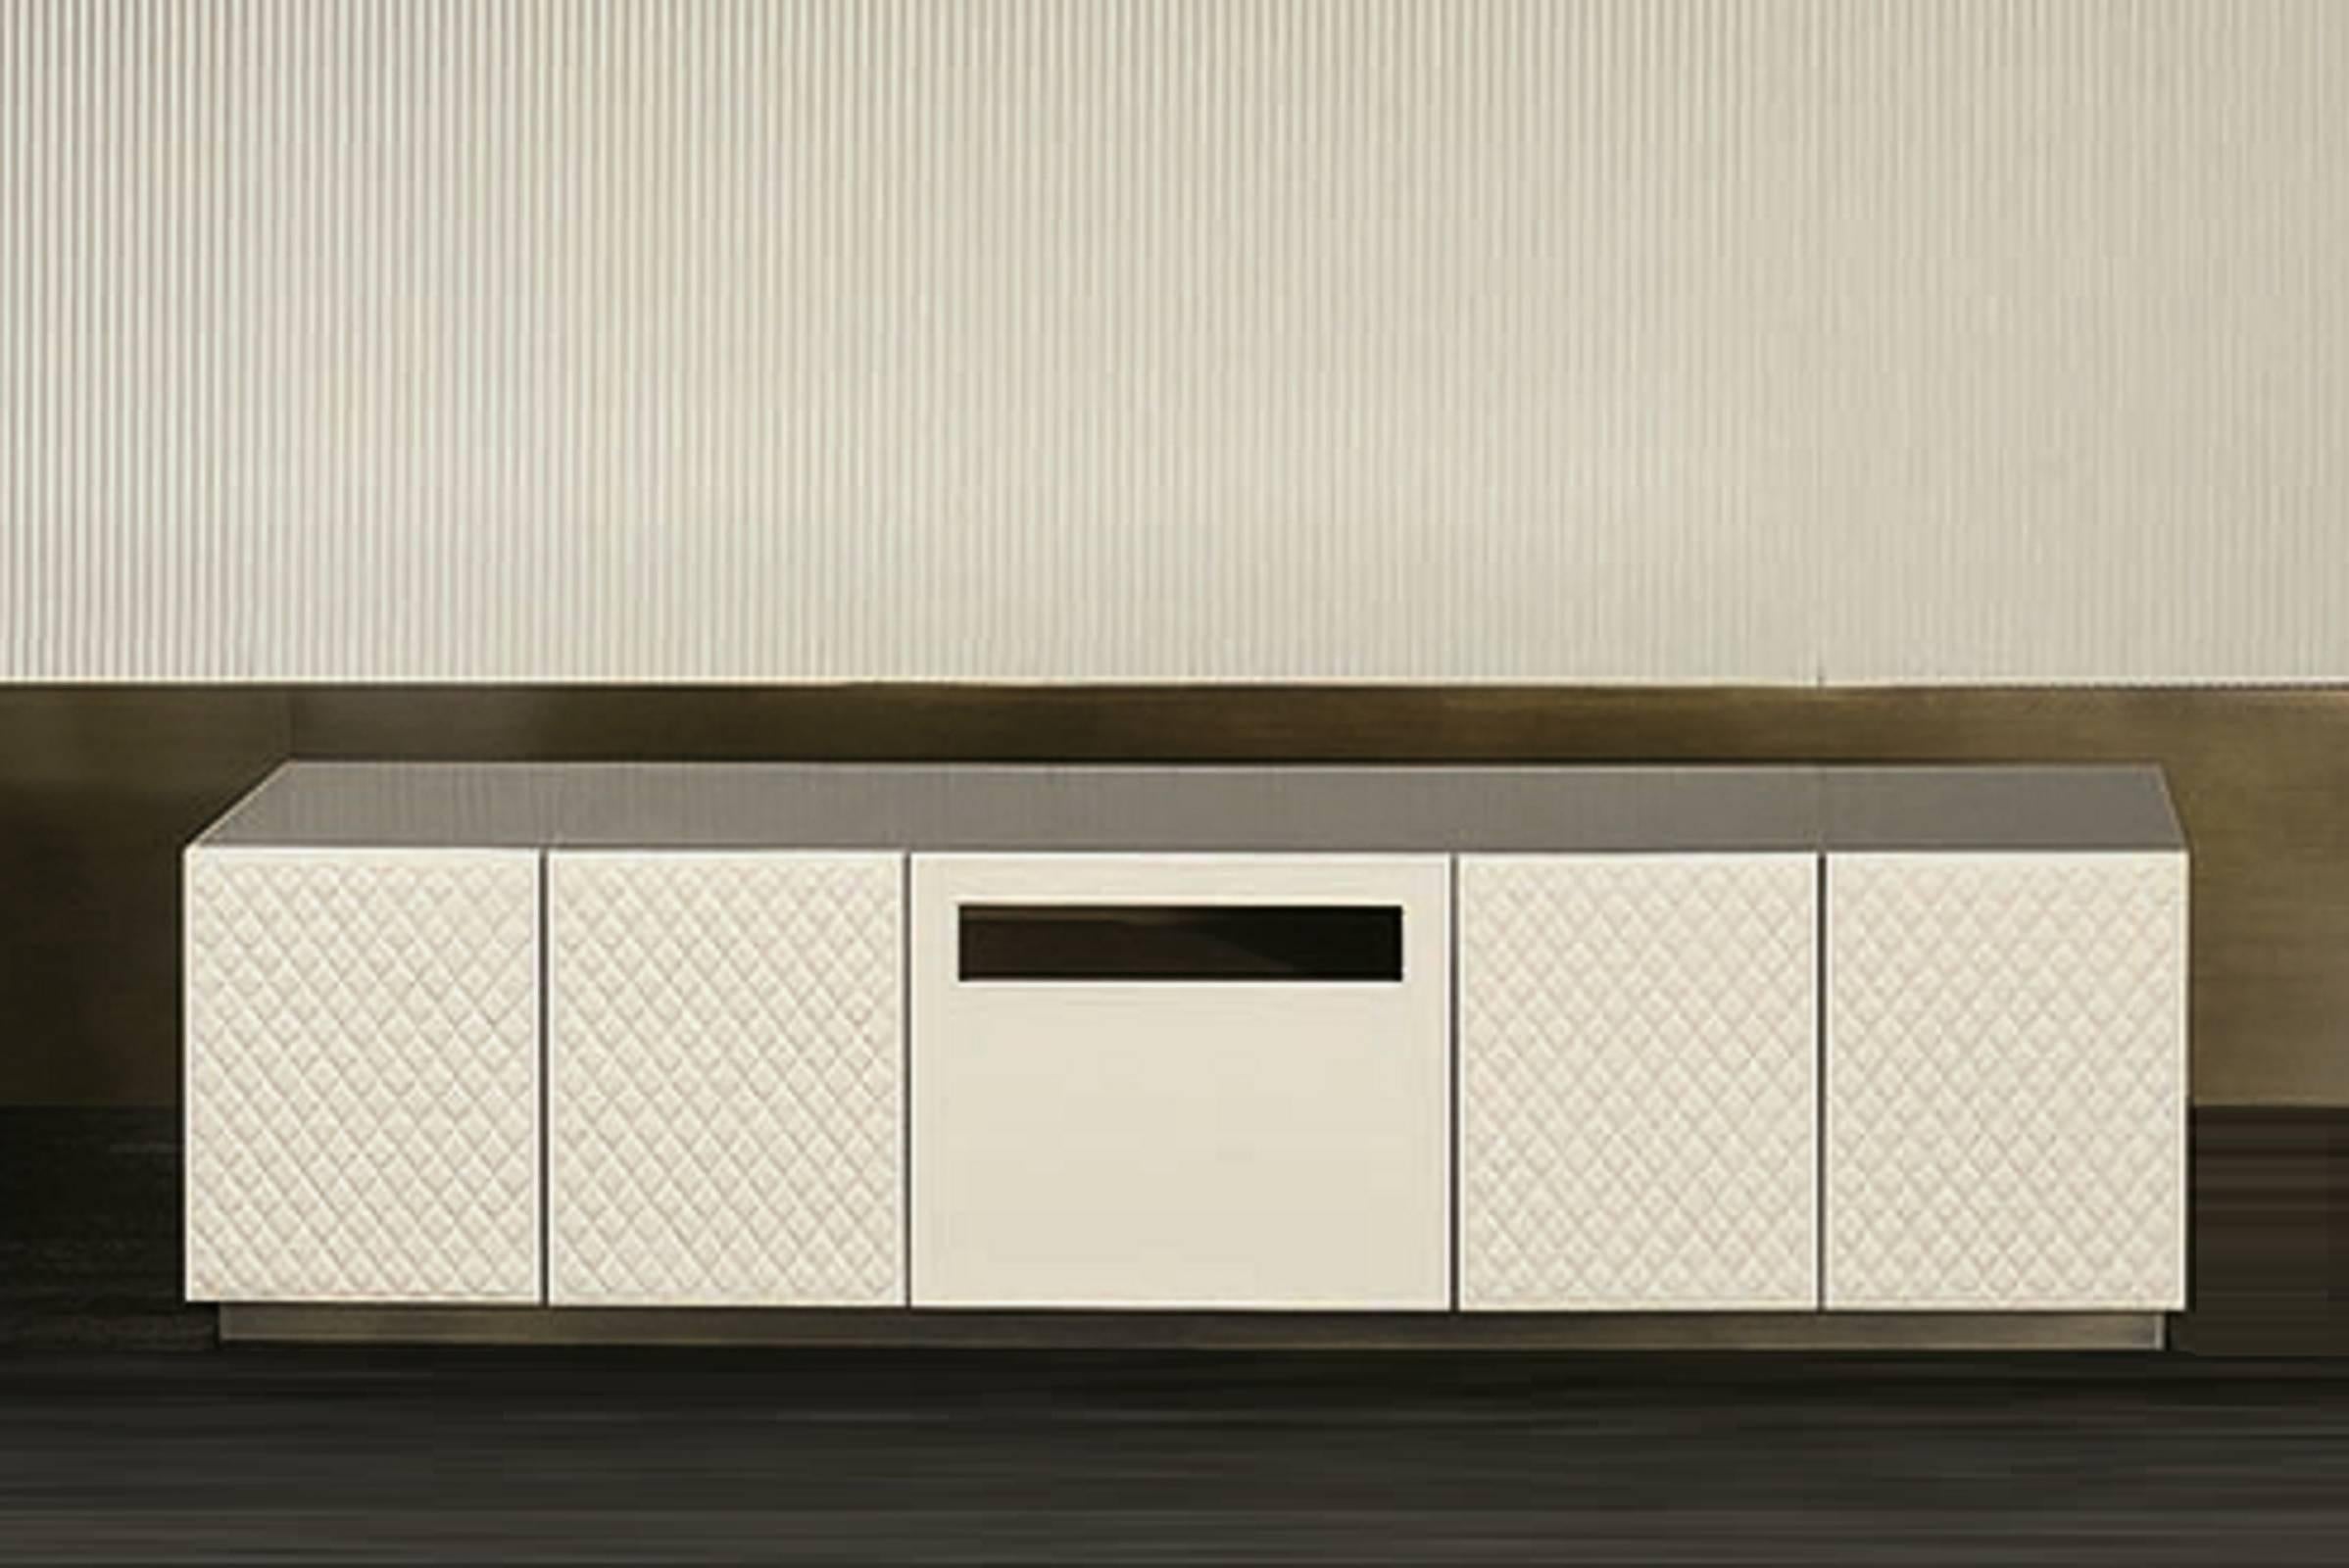 Plasma and TV holder Suffolk structure and doors.
Matlassé in leather cat. B + C/D.
Four doors matlassé with leather cat. C.
Drawers lacquered or with leather as request,
Inside matte lacquered.
Available in:
Two or six doors.
Steel and leather